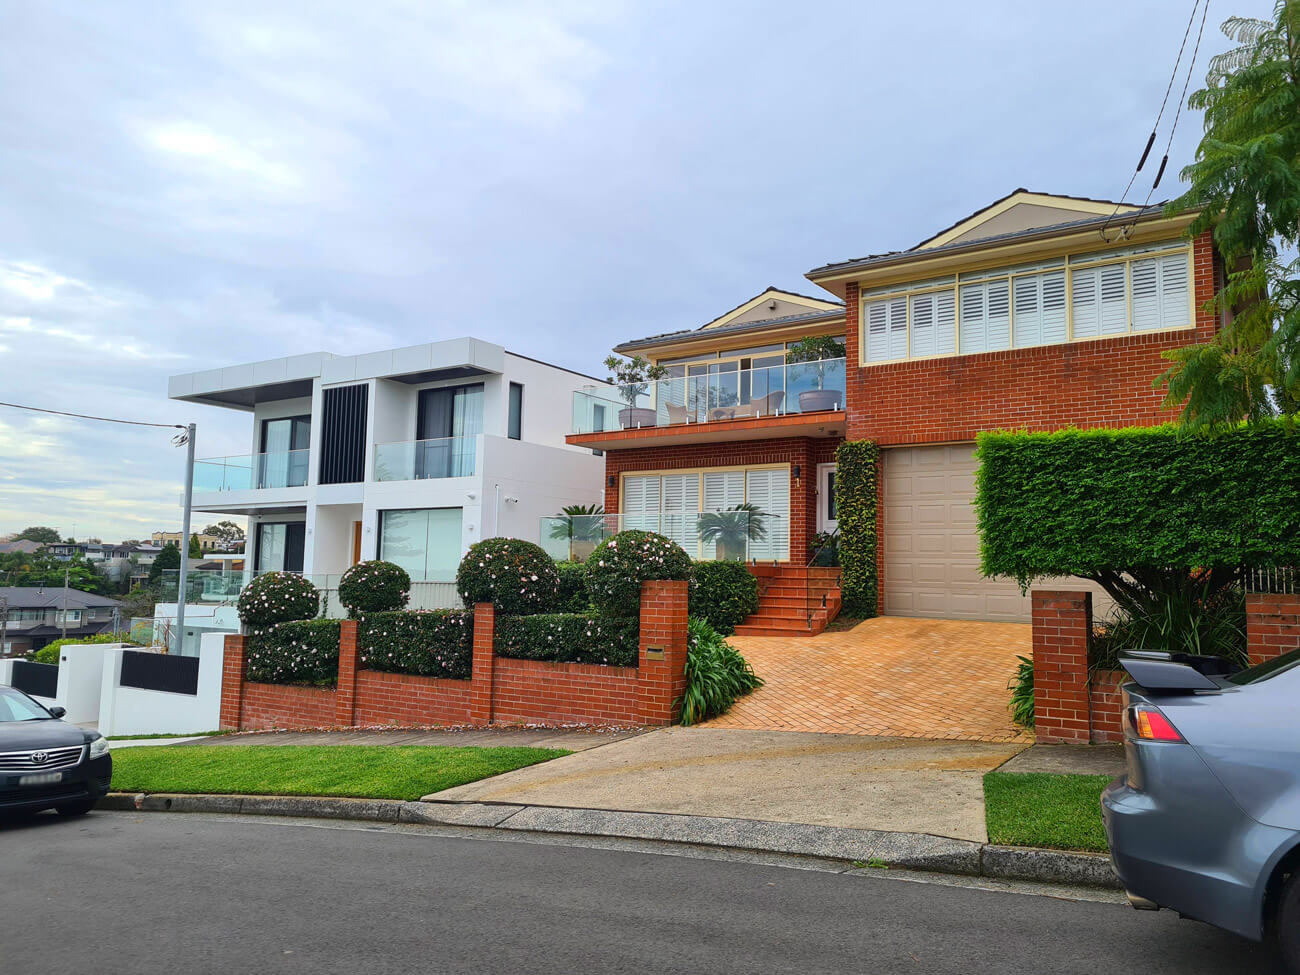 Gladesville wealthy homes